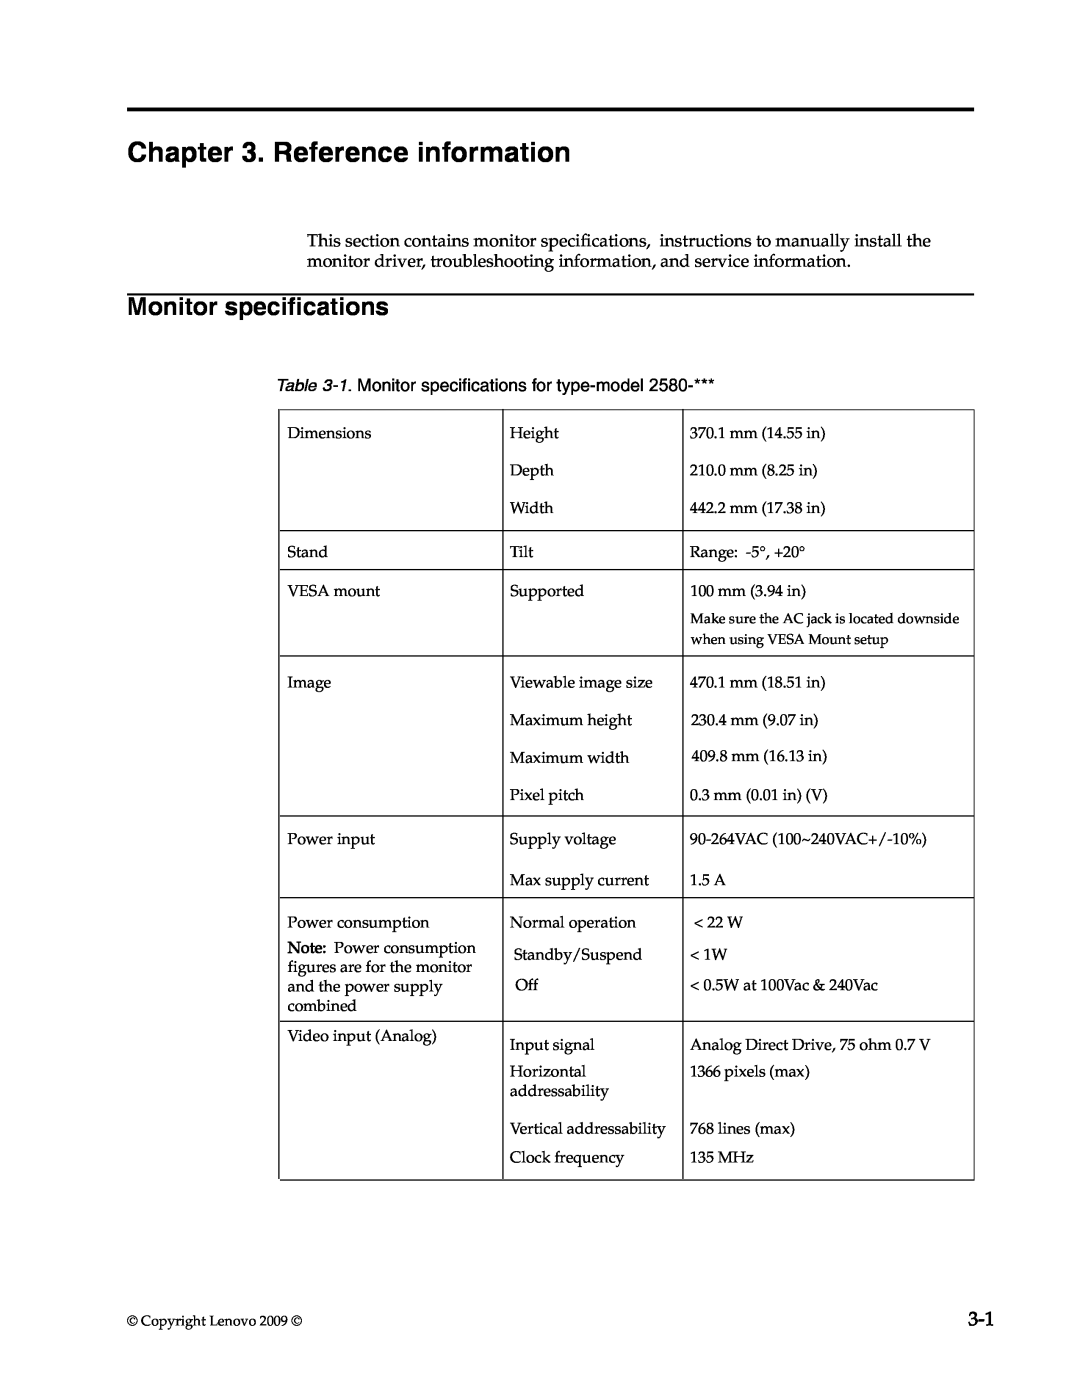 Lenovo D186 manual Reference information, 1. Monitor specifications for type-model 